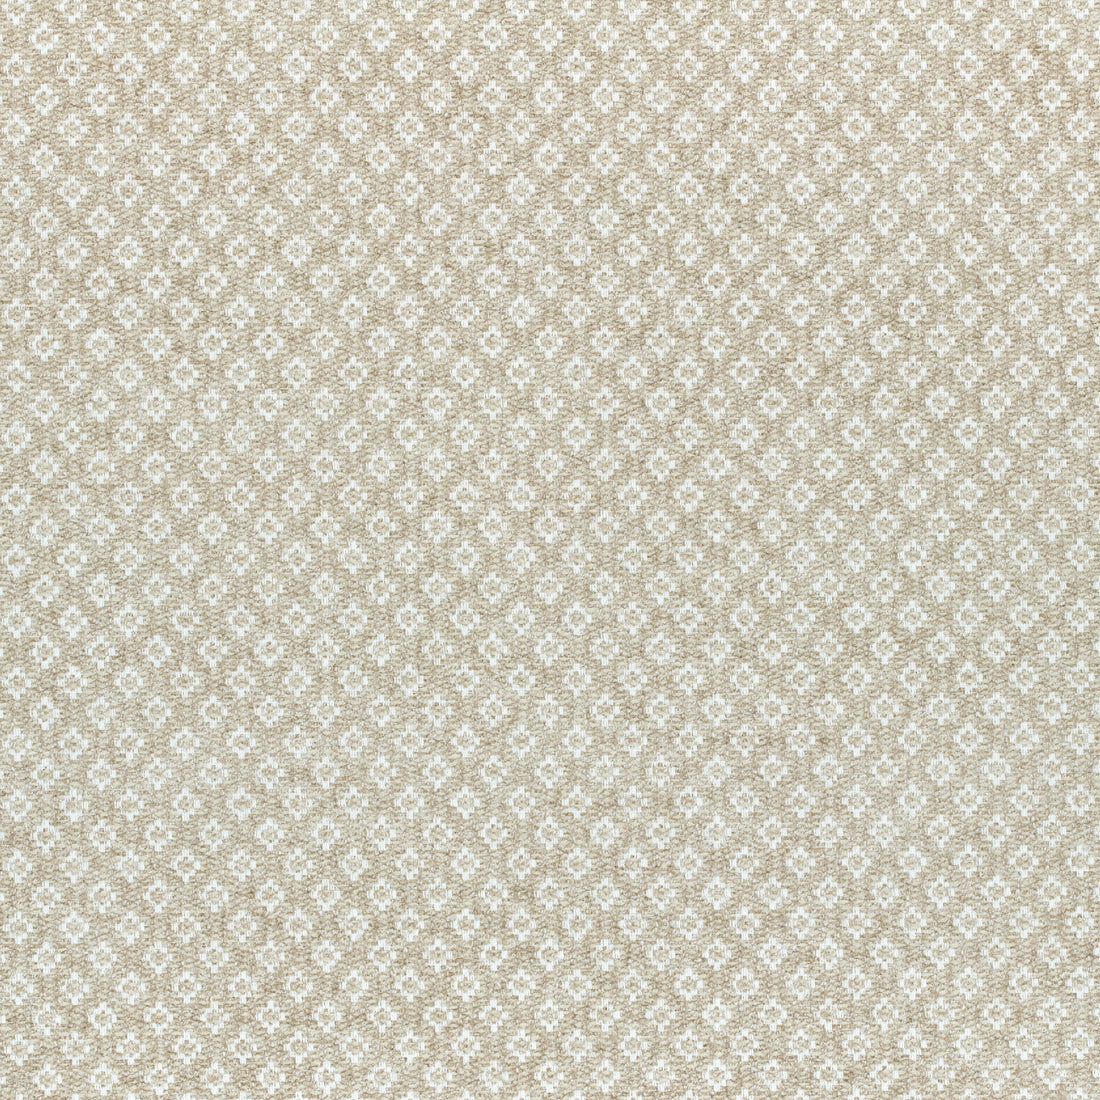 Claudio fabric in beige color - pattern number AW72970 - by Anna French in the Manor collection